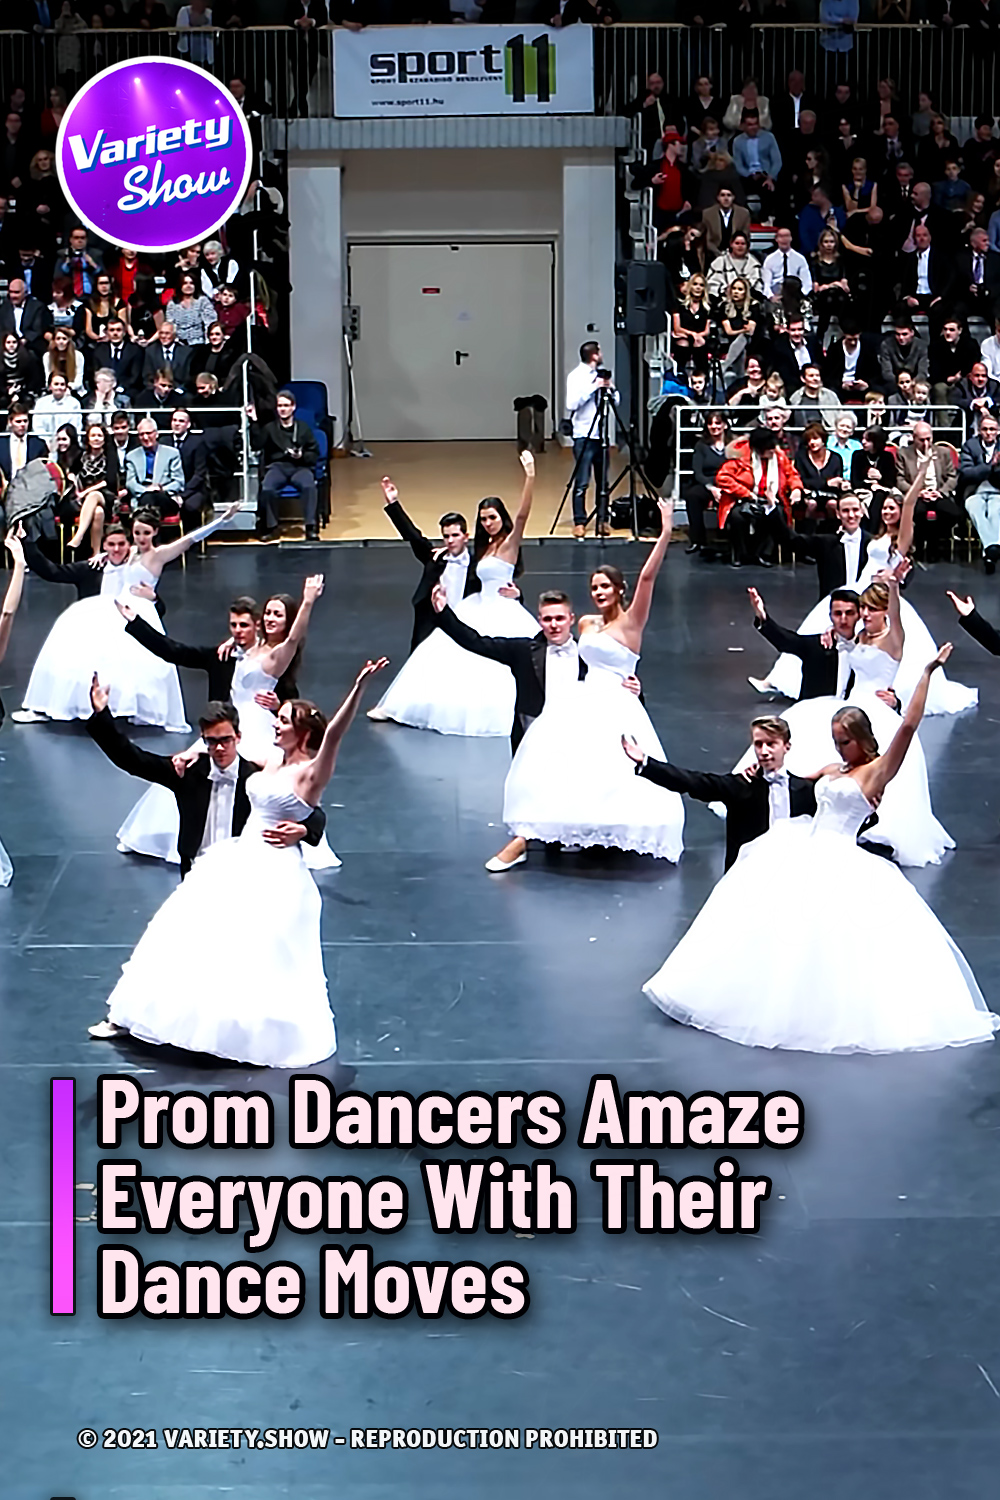 Prom Dancers Amaze Everyone With Their Dance Moves